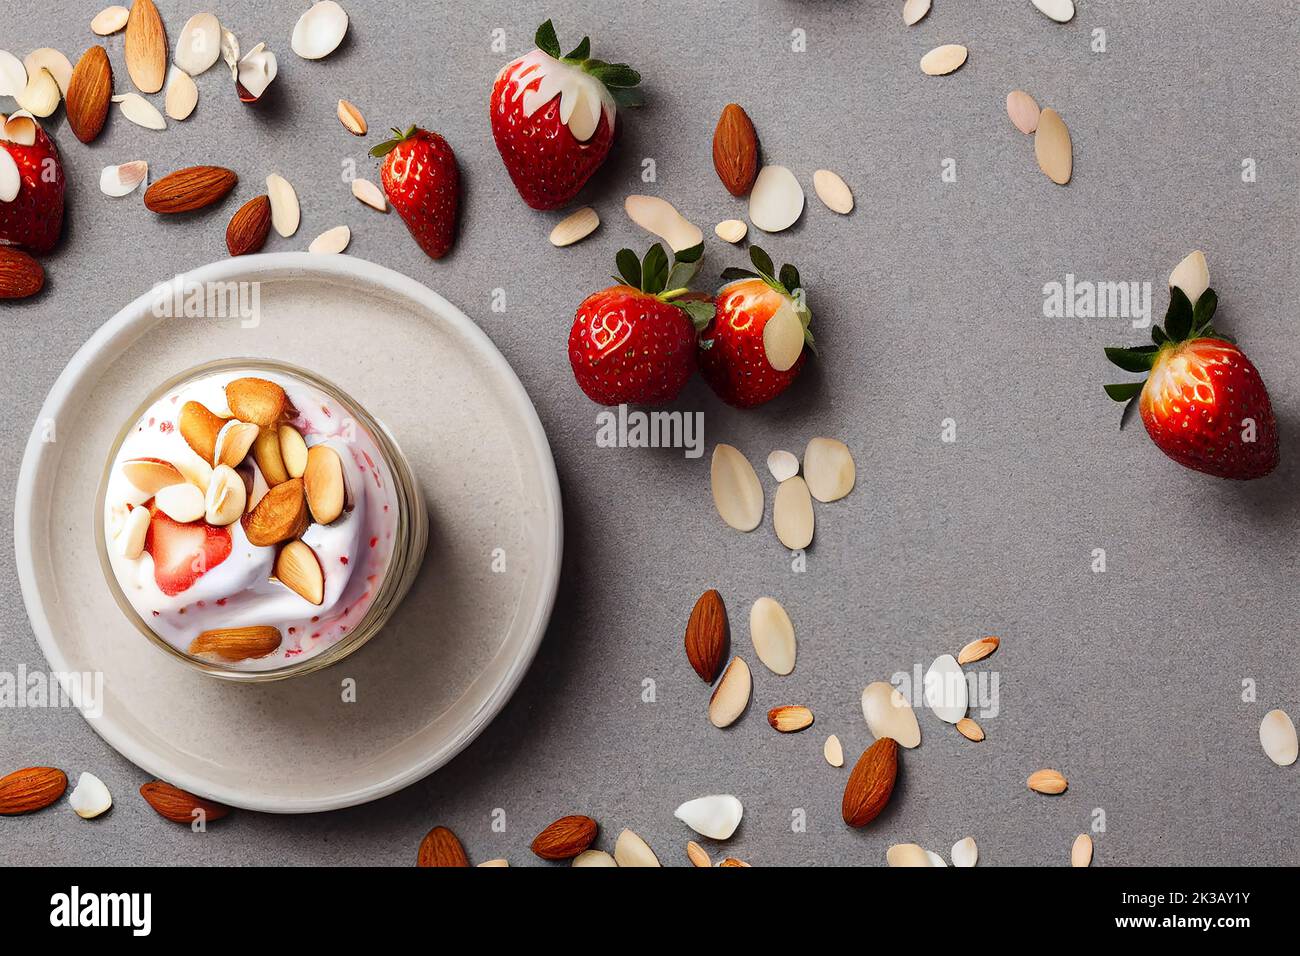 Healthy breakfast of strawberry parfaits made with fresh fruit, yogurt and granola on a gray table, food photography and illustration Stock Photo